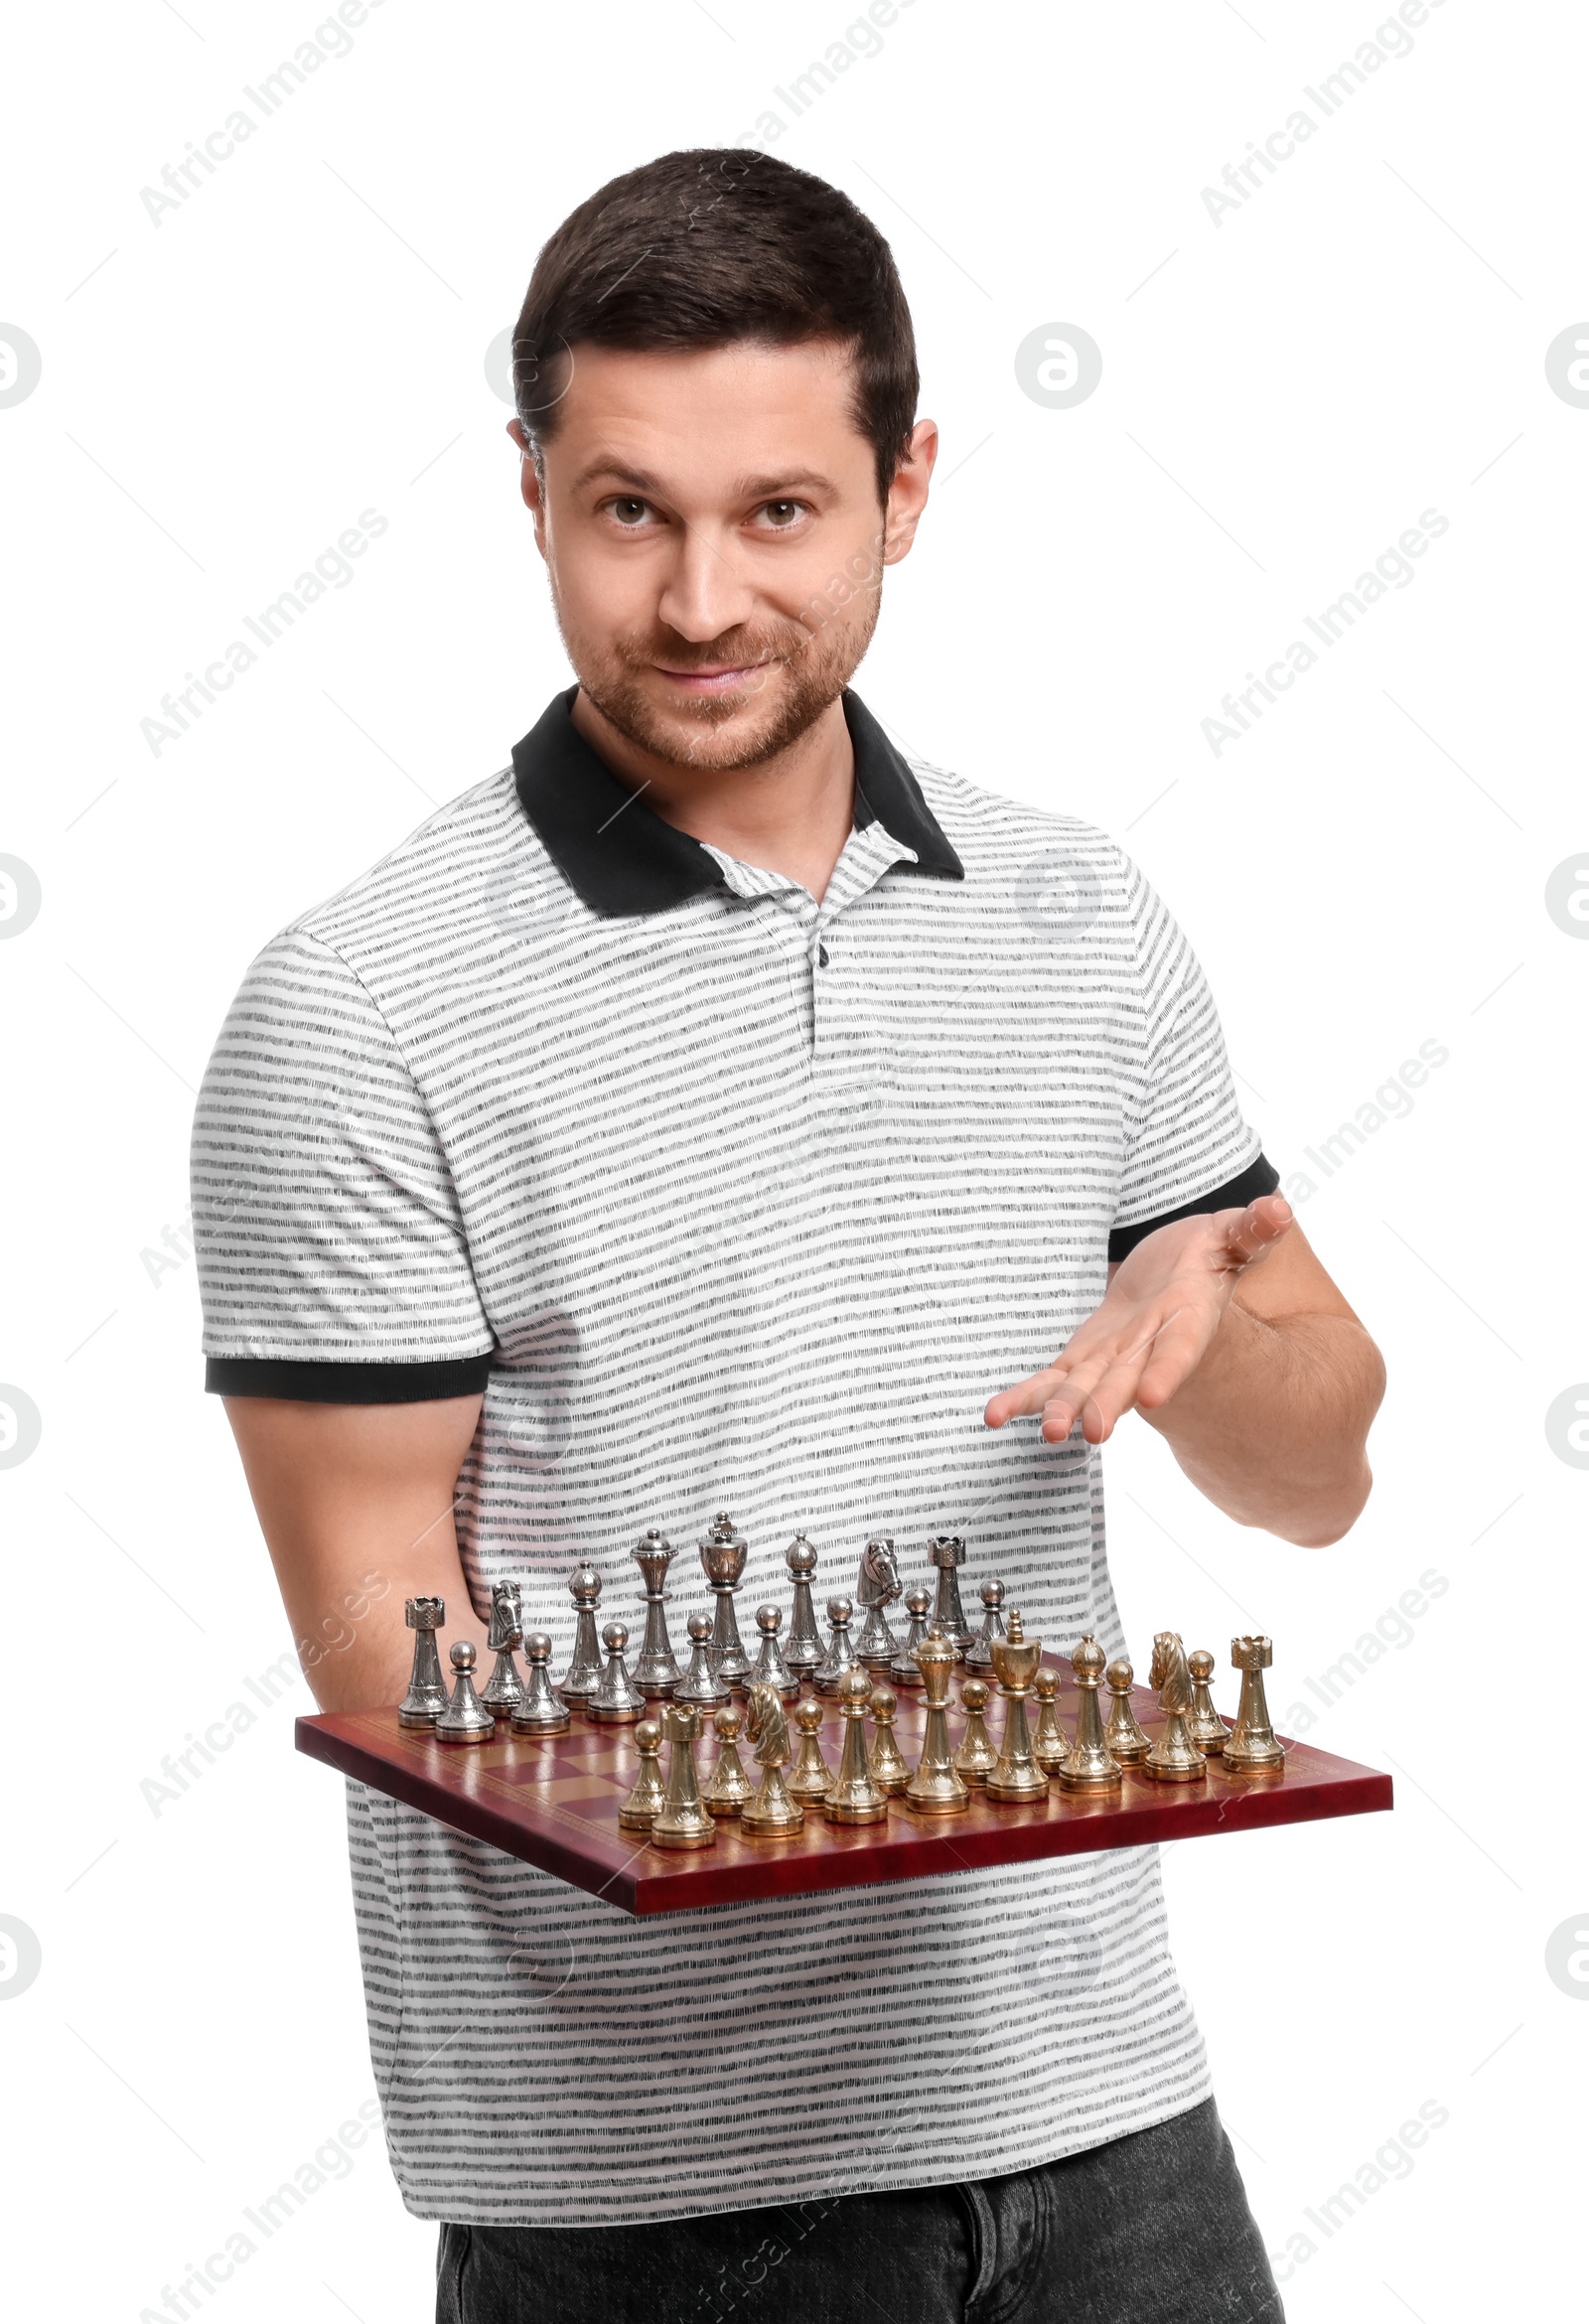 Photo of Smiling man showing chessboard with game pieces on white background